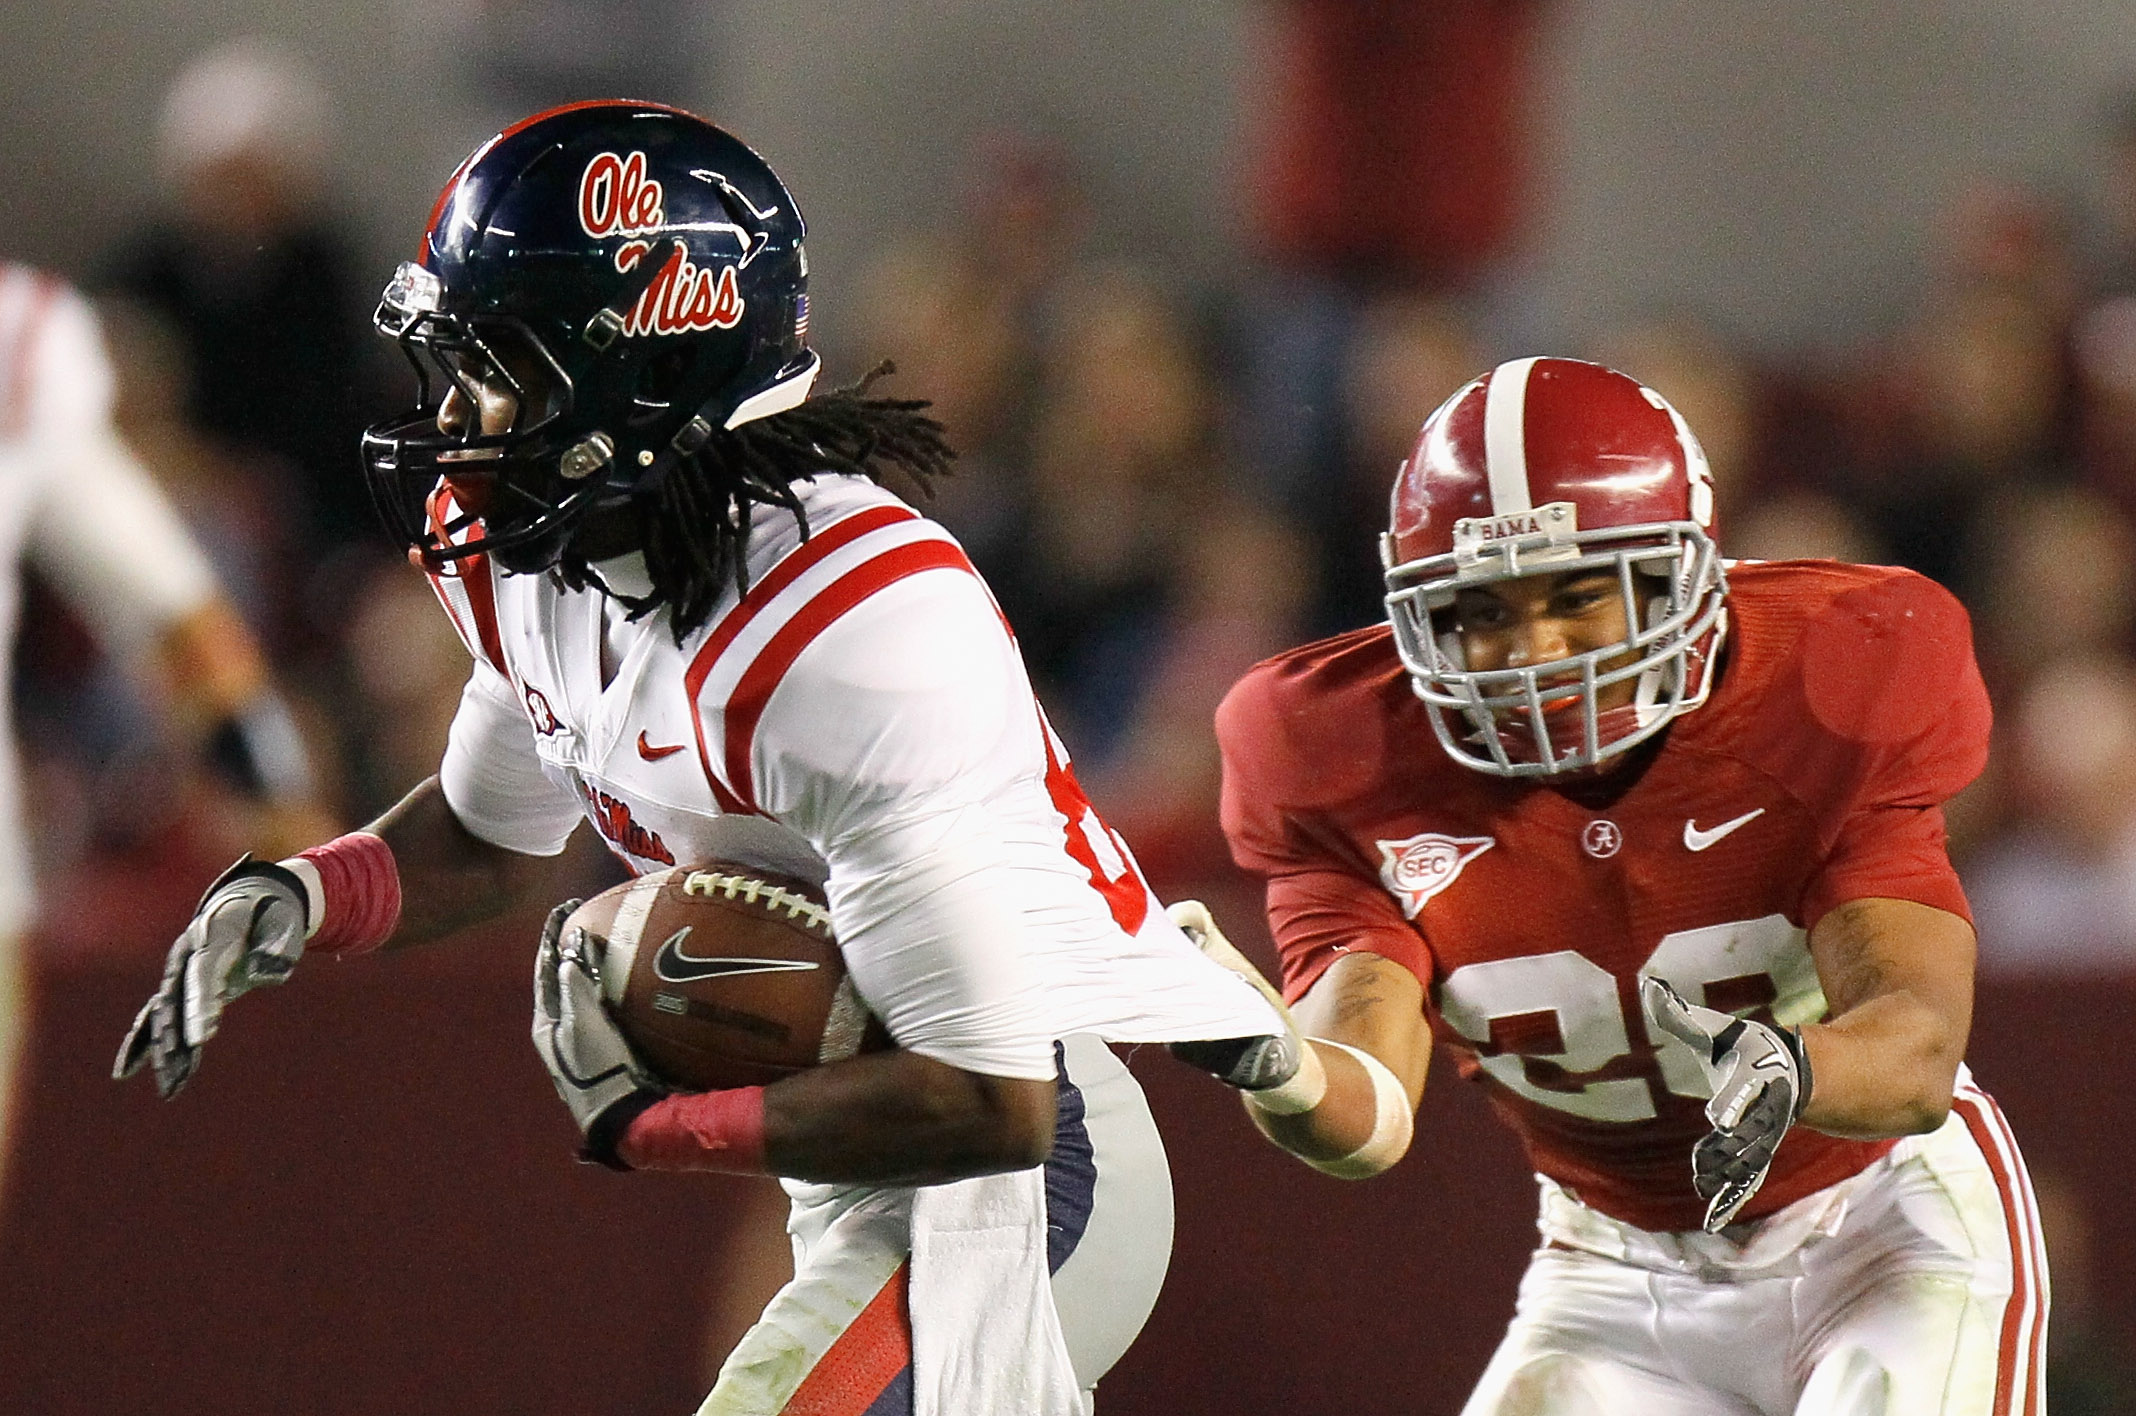 TUSCALOOSA, AL - OCTOBER 16:  DeMarcus Milliner #28 of the Alabama Crimson Tide grabs the jersey of Ja'mes Logan #85 of the Ole Miss Rebels at Bryant-Denny Stadium on October 16, 2010 in Tuscaloosa, Alabama.  (Photo by Kevin C. Cox/Getty Images)